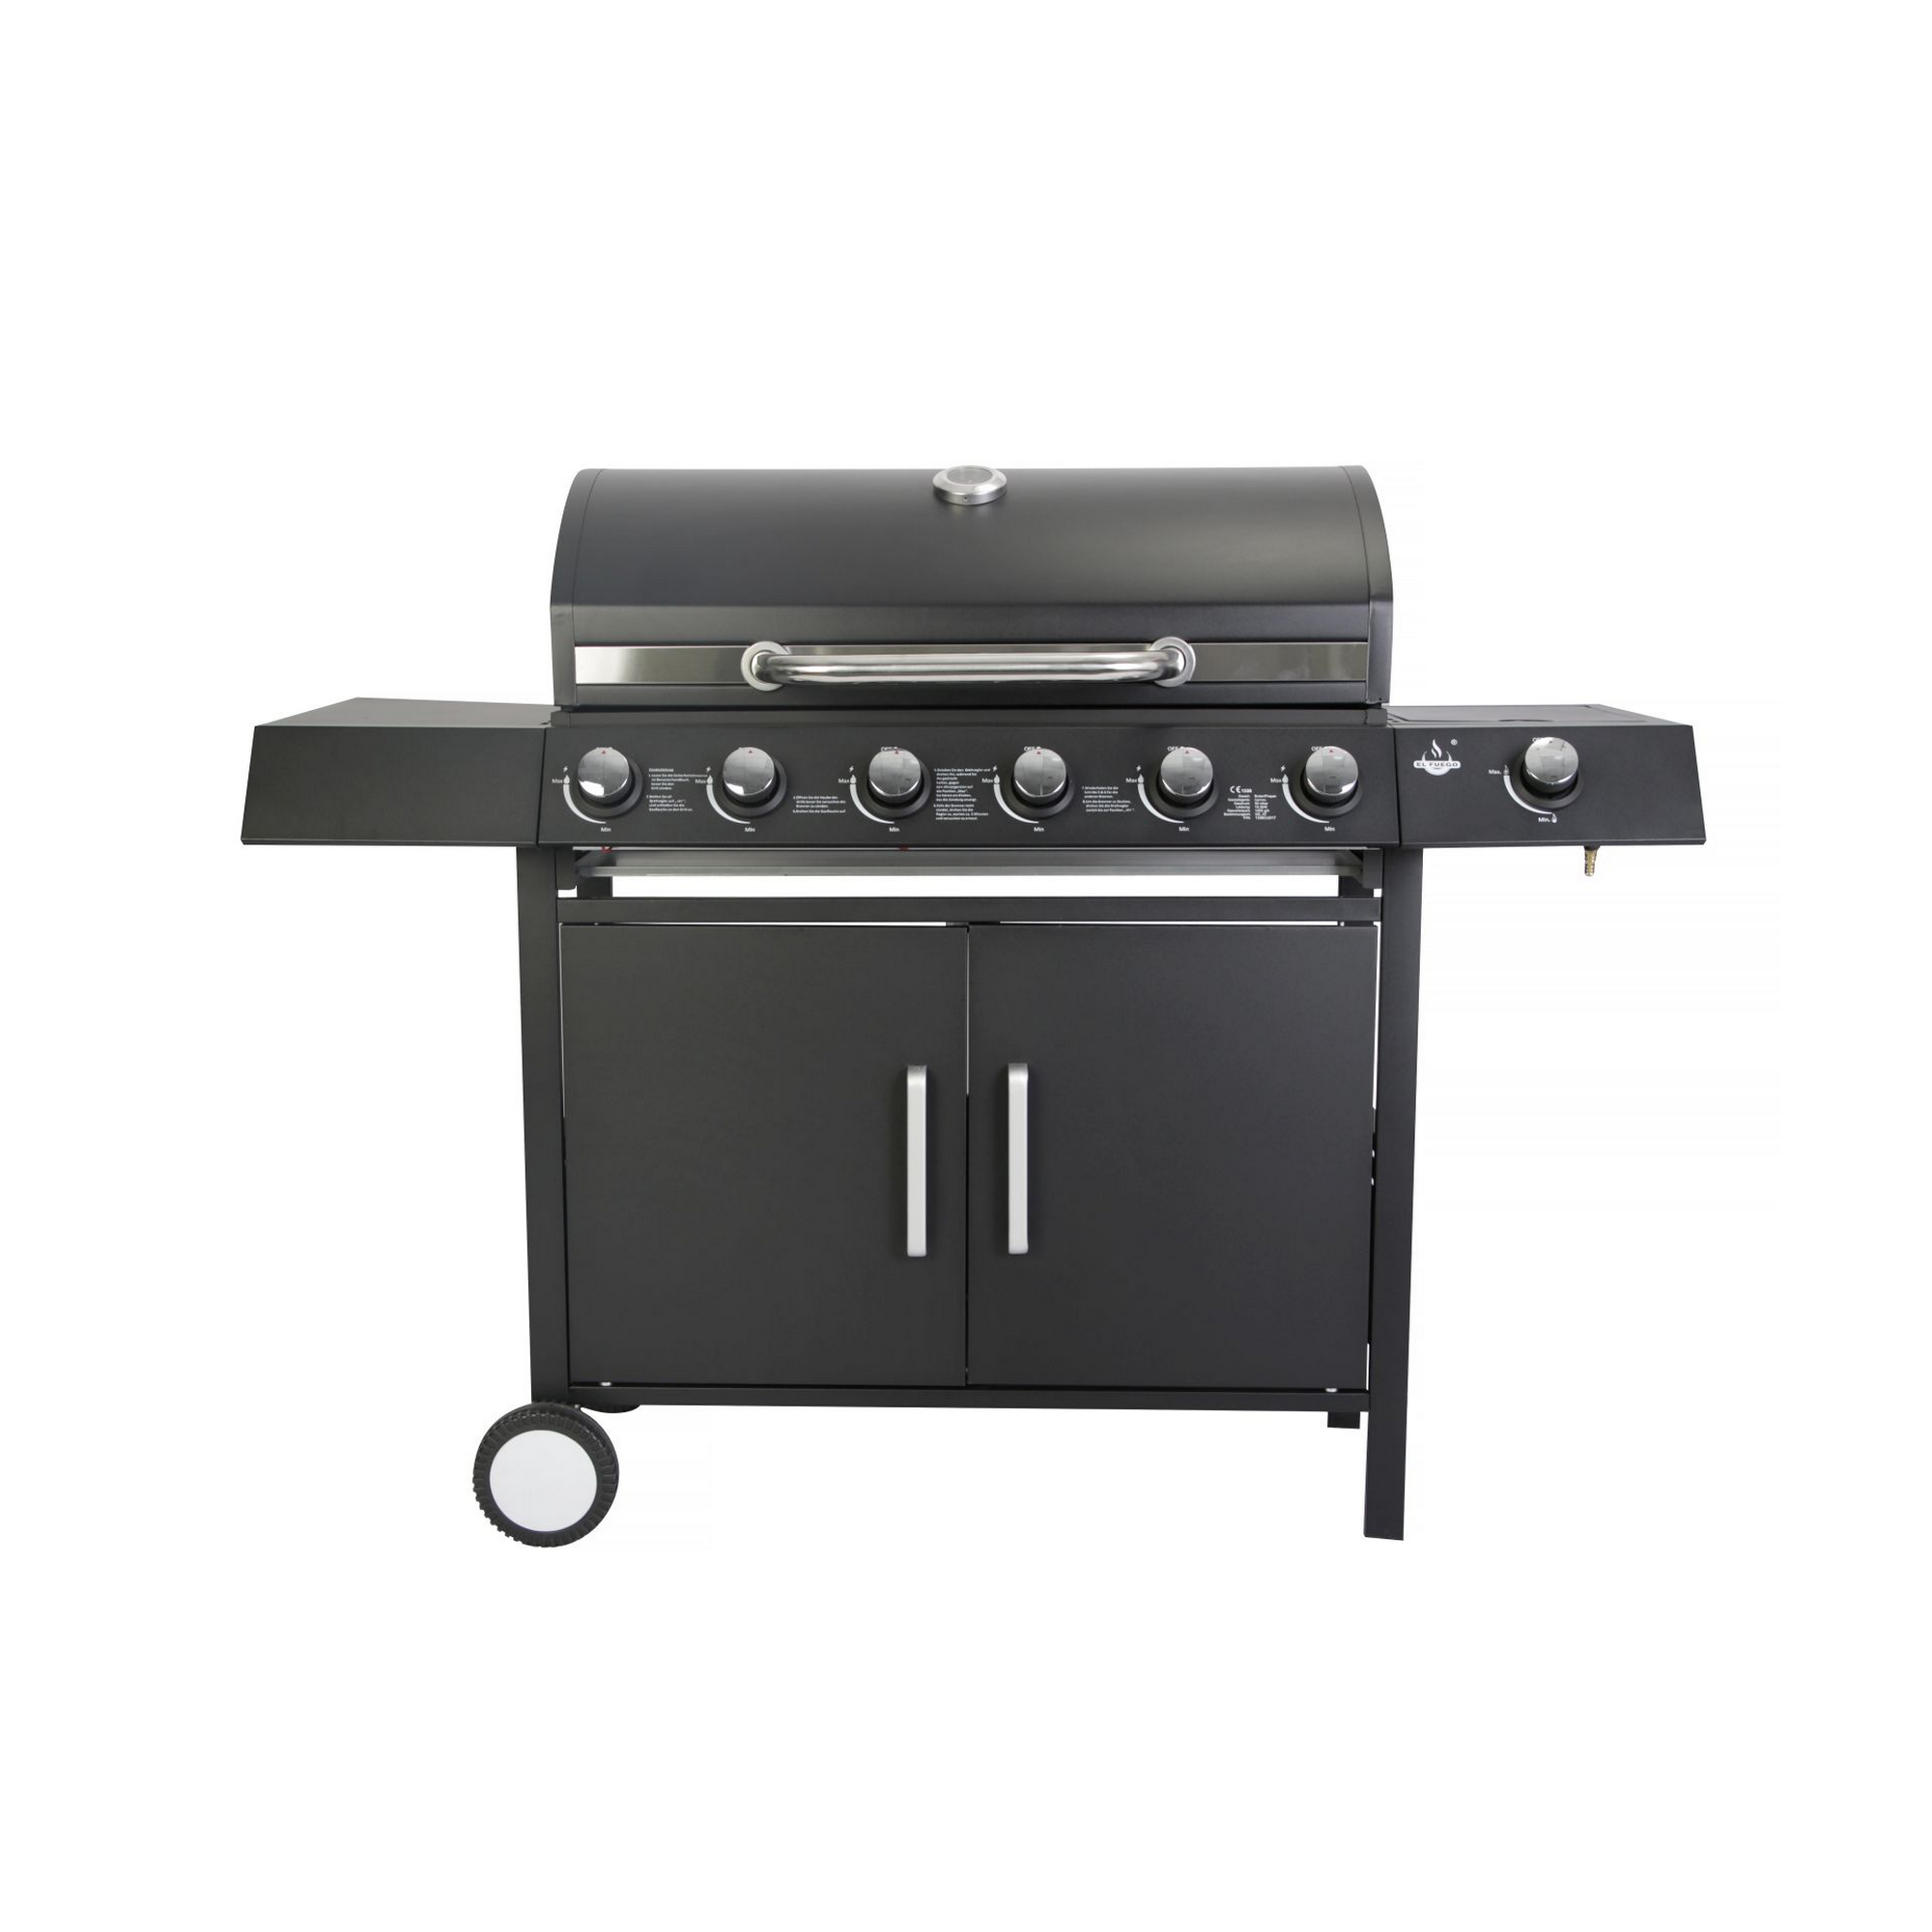 Gasgrill 'San Angelo' schwarz 110 x 141 x 48 cm + product picture